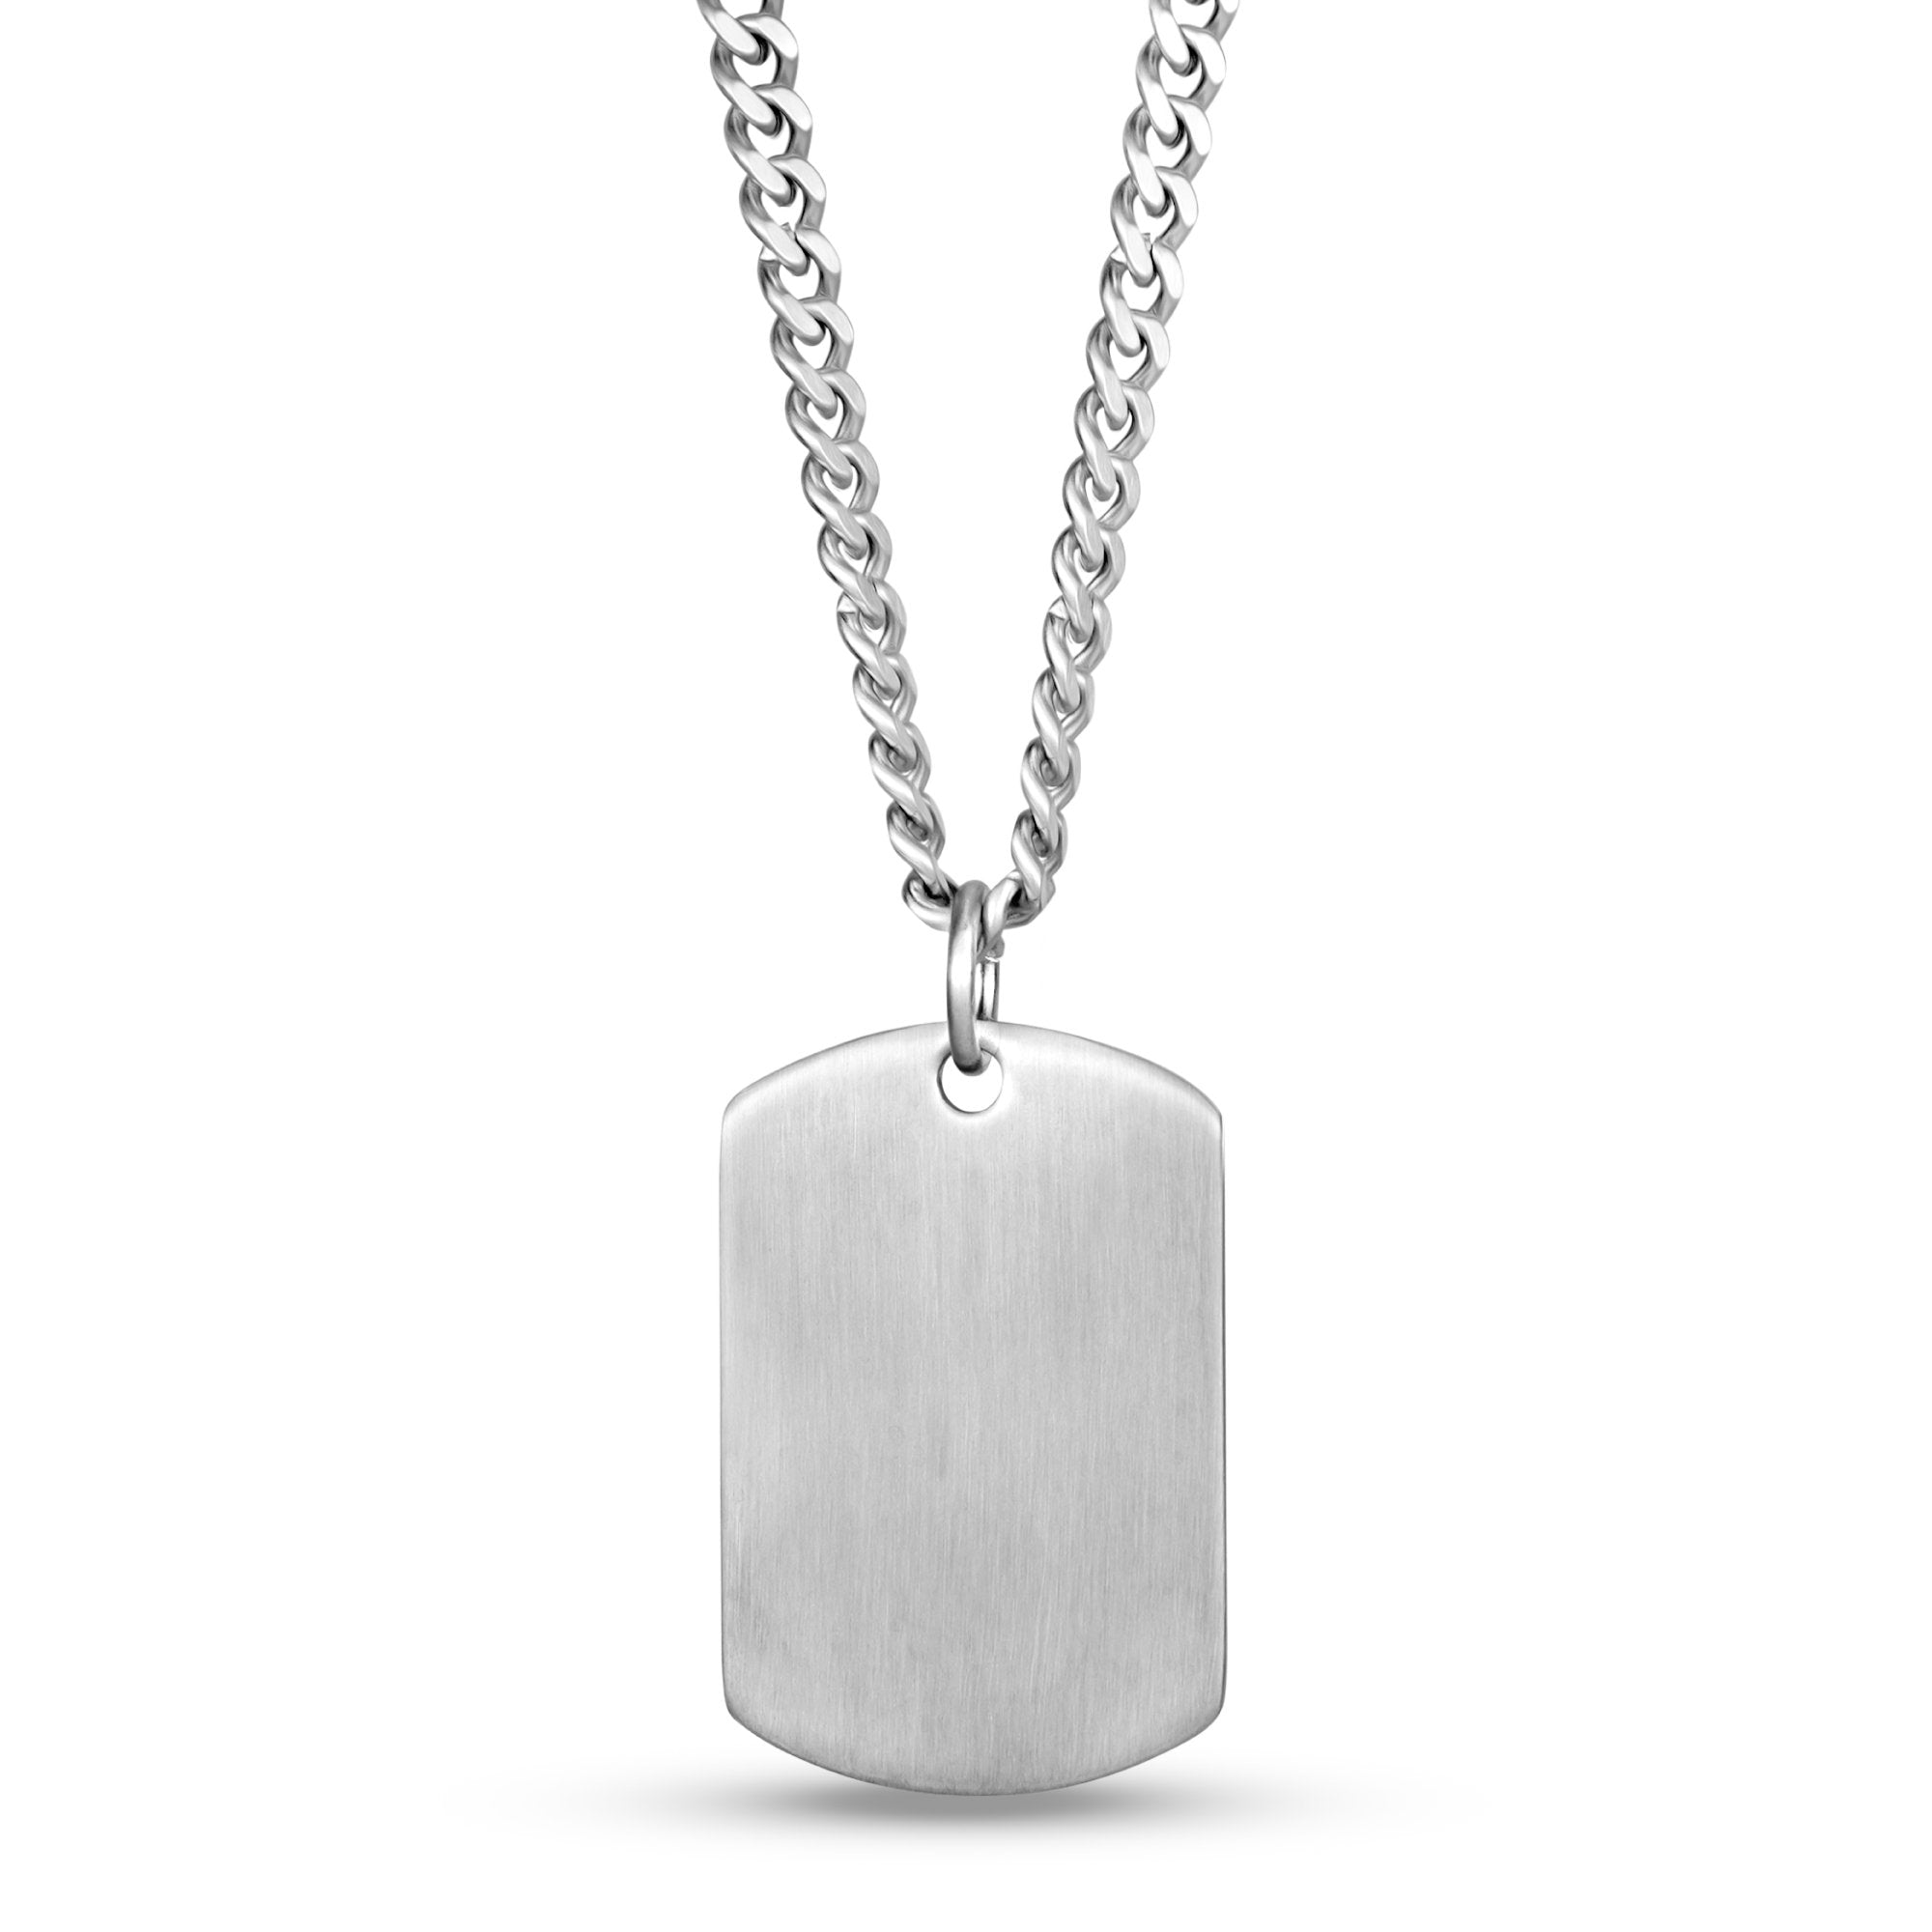 Buy VIRAASI Silver-Plated Dog Tag Pendant With Chain | Shoppers Stop